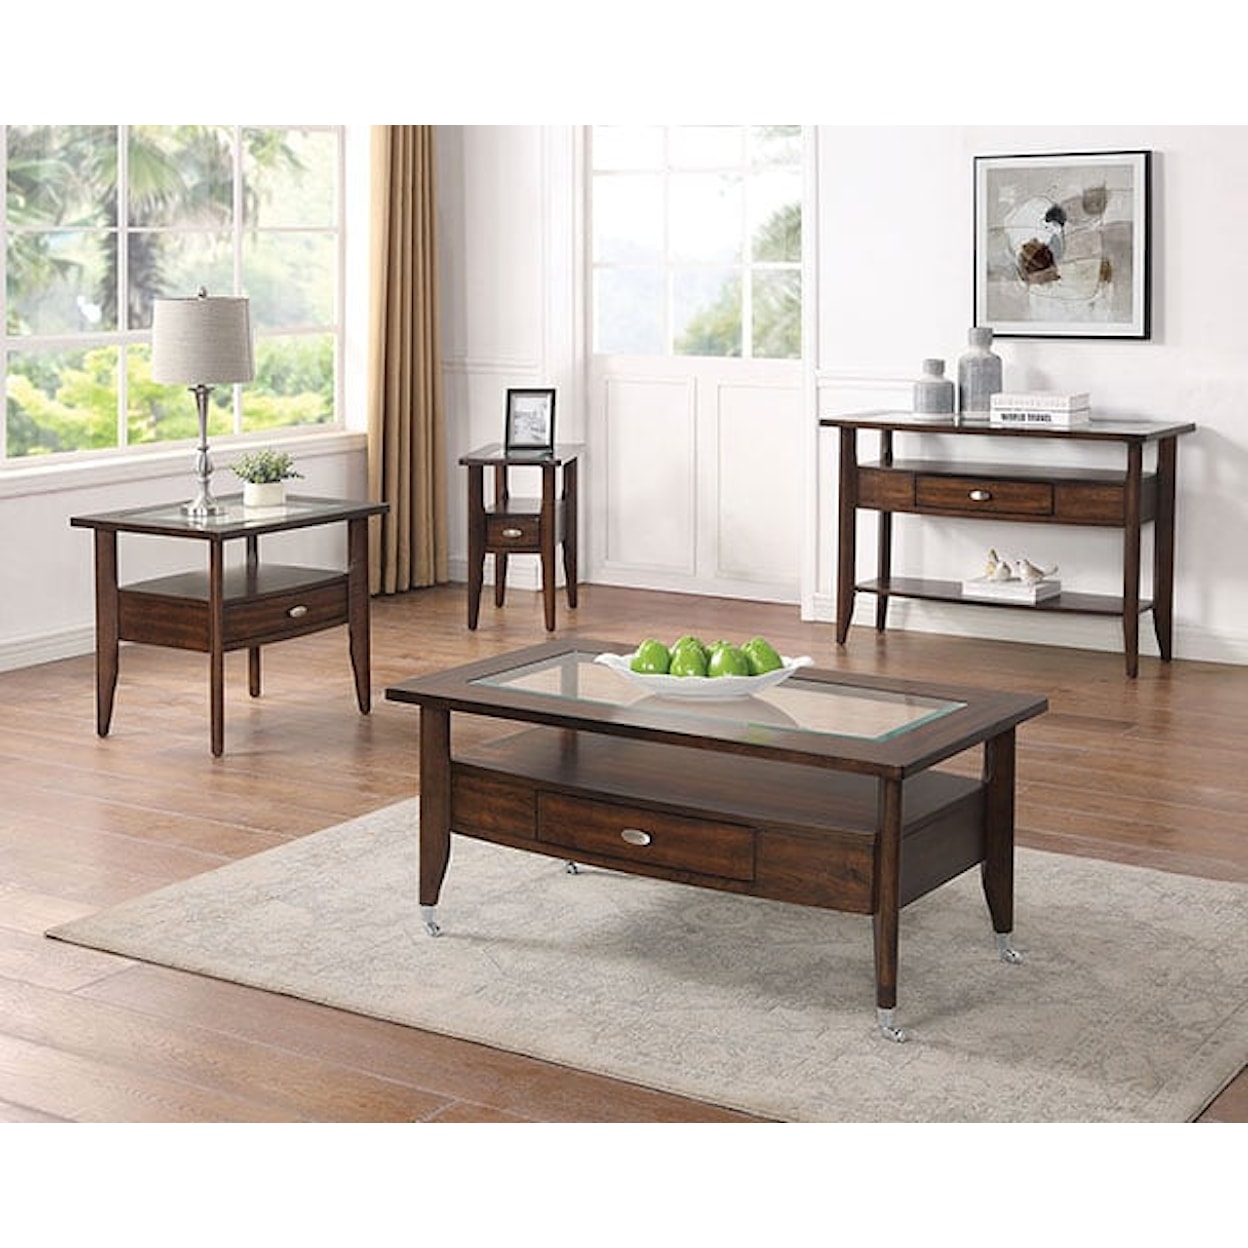 Furniture of America Riverdale Dark Walnut Console Table with Glass Top